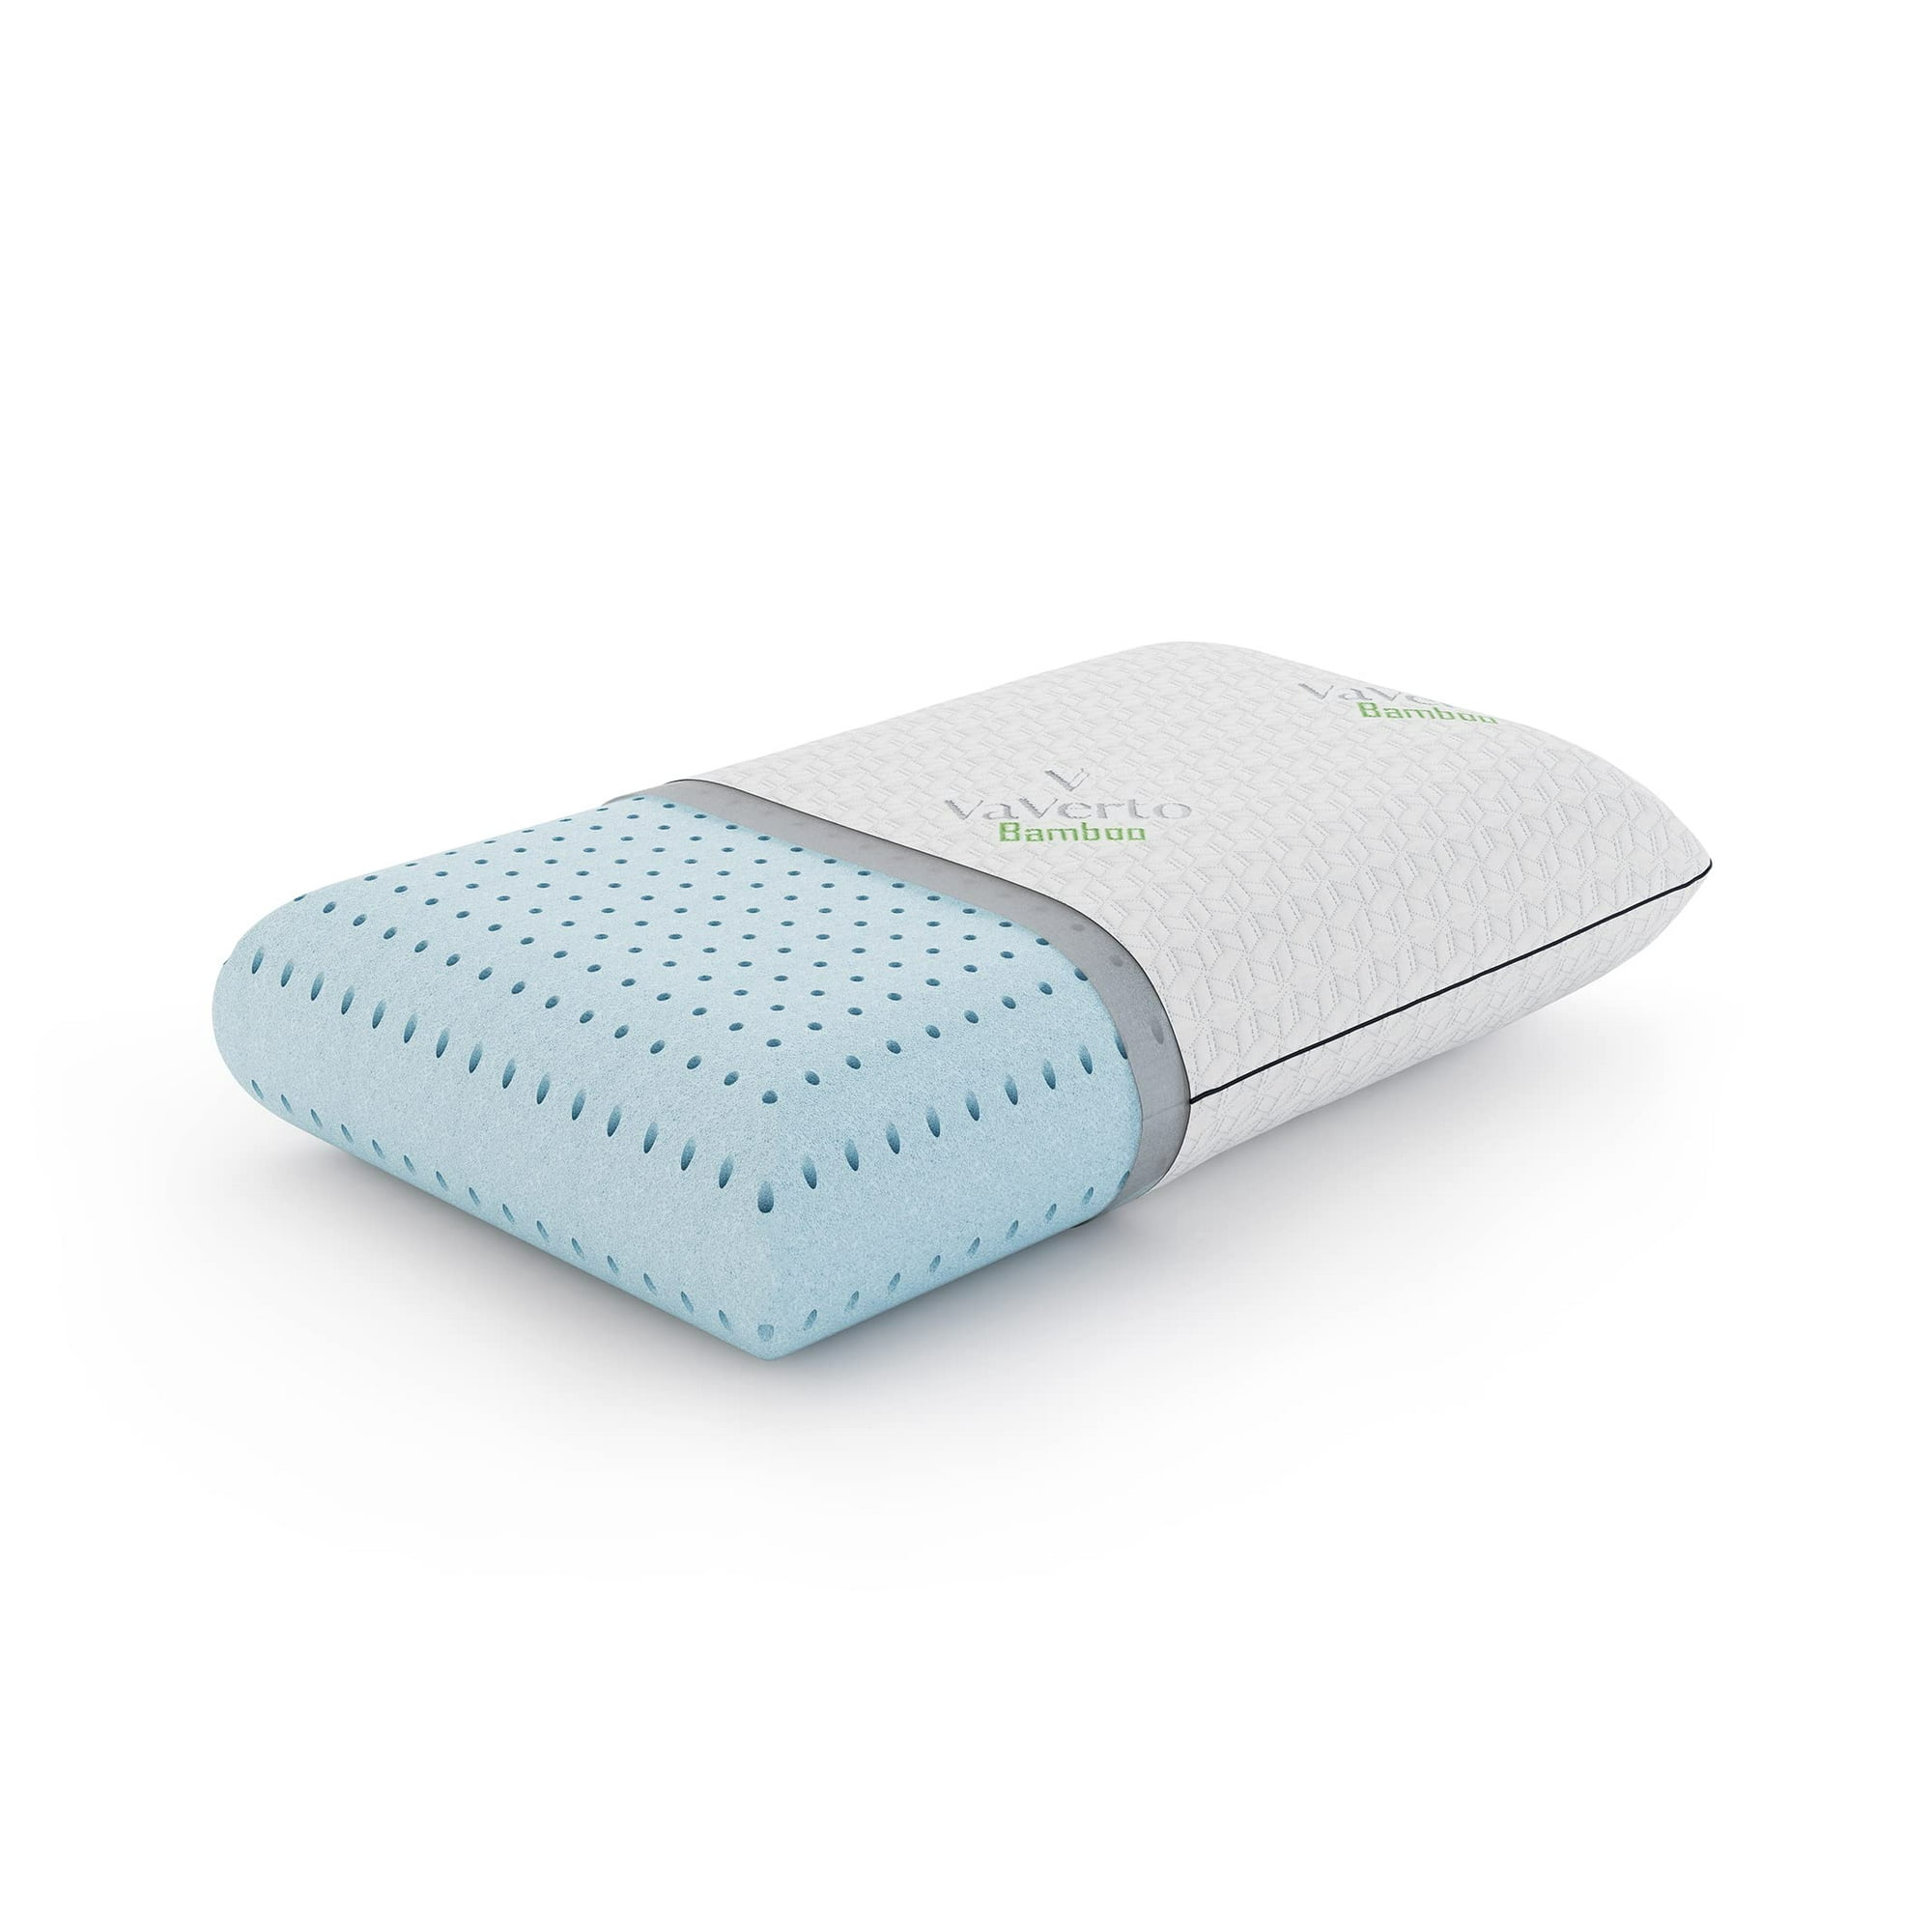 Best Cooling Pillows - Our Top 5 Picks For Hot Sleepers! 